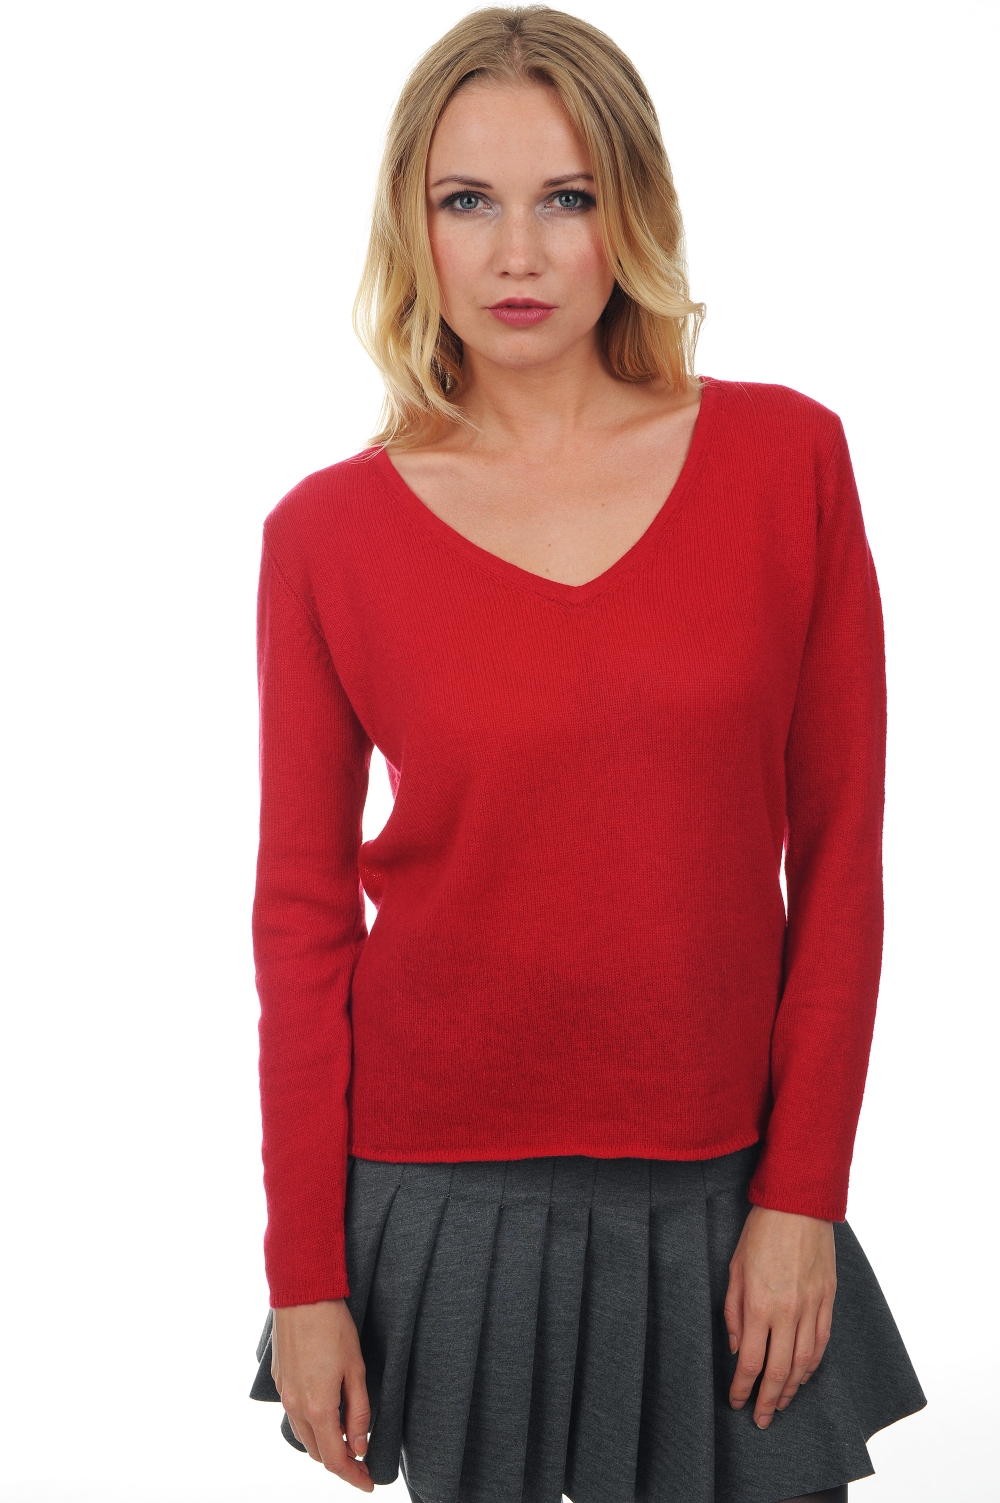 Cashmere ladies basic sweaters at low prices flavie blood red 4xl